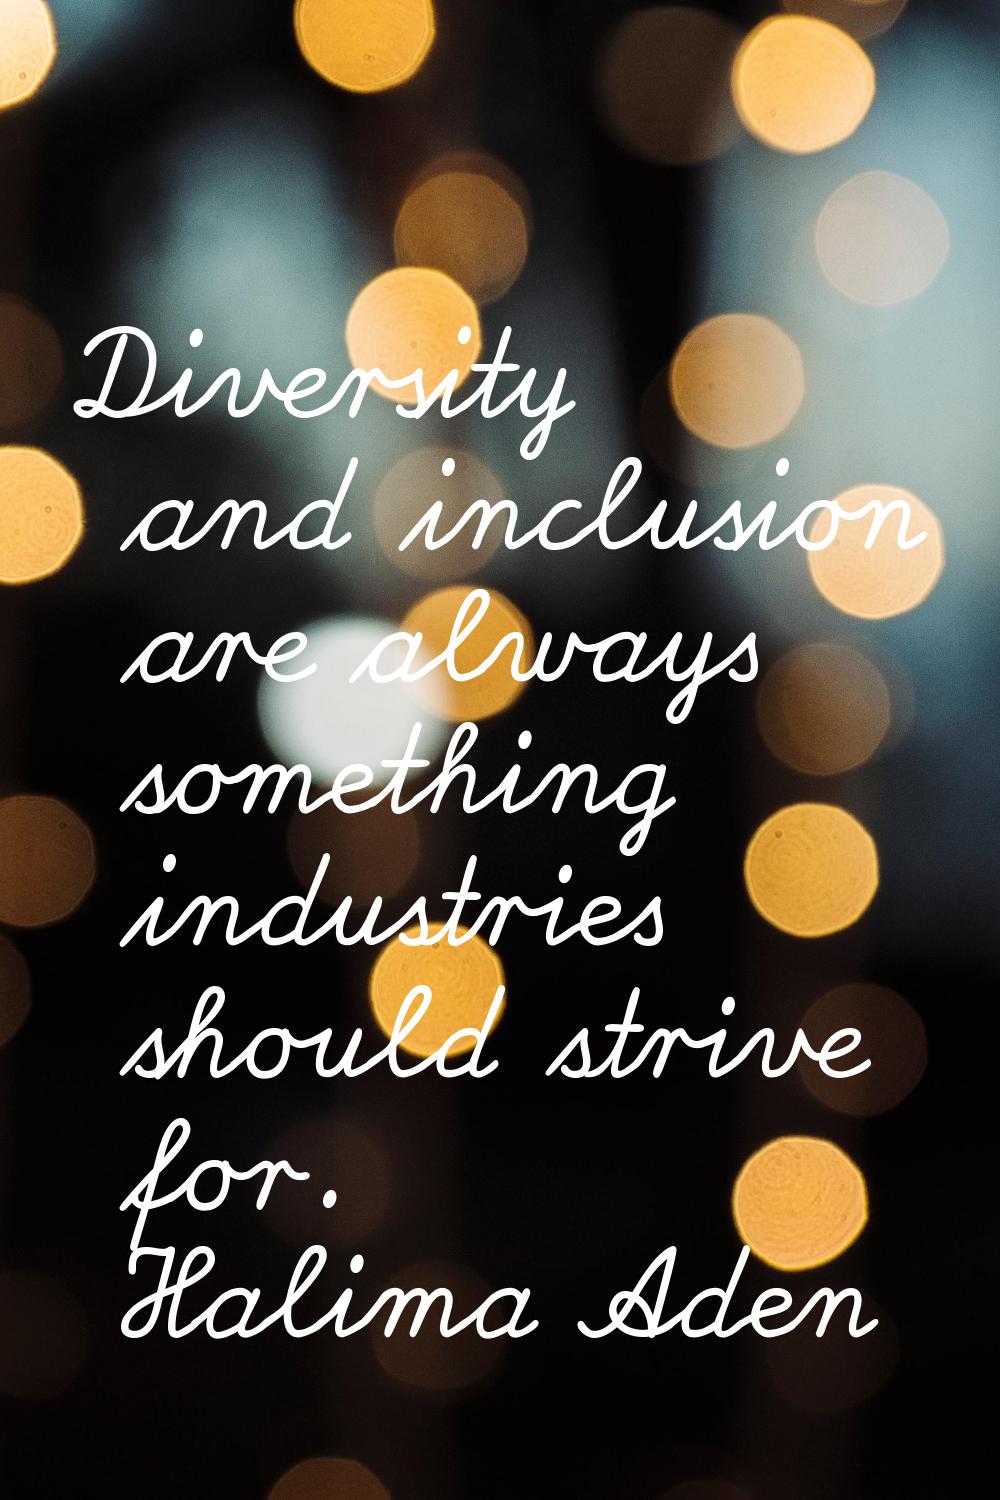 Diversity and inclusion are always something industries should strive for.